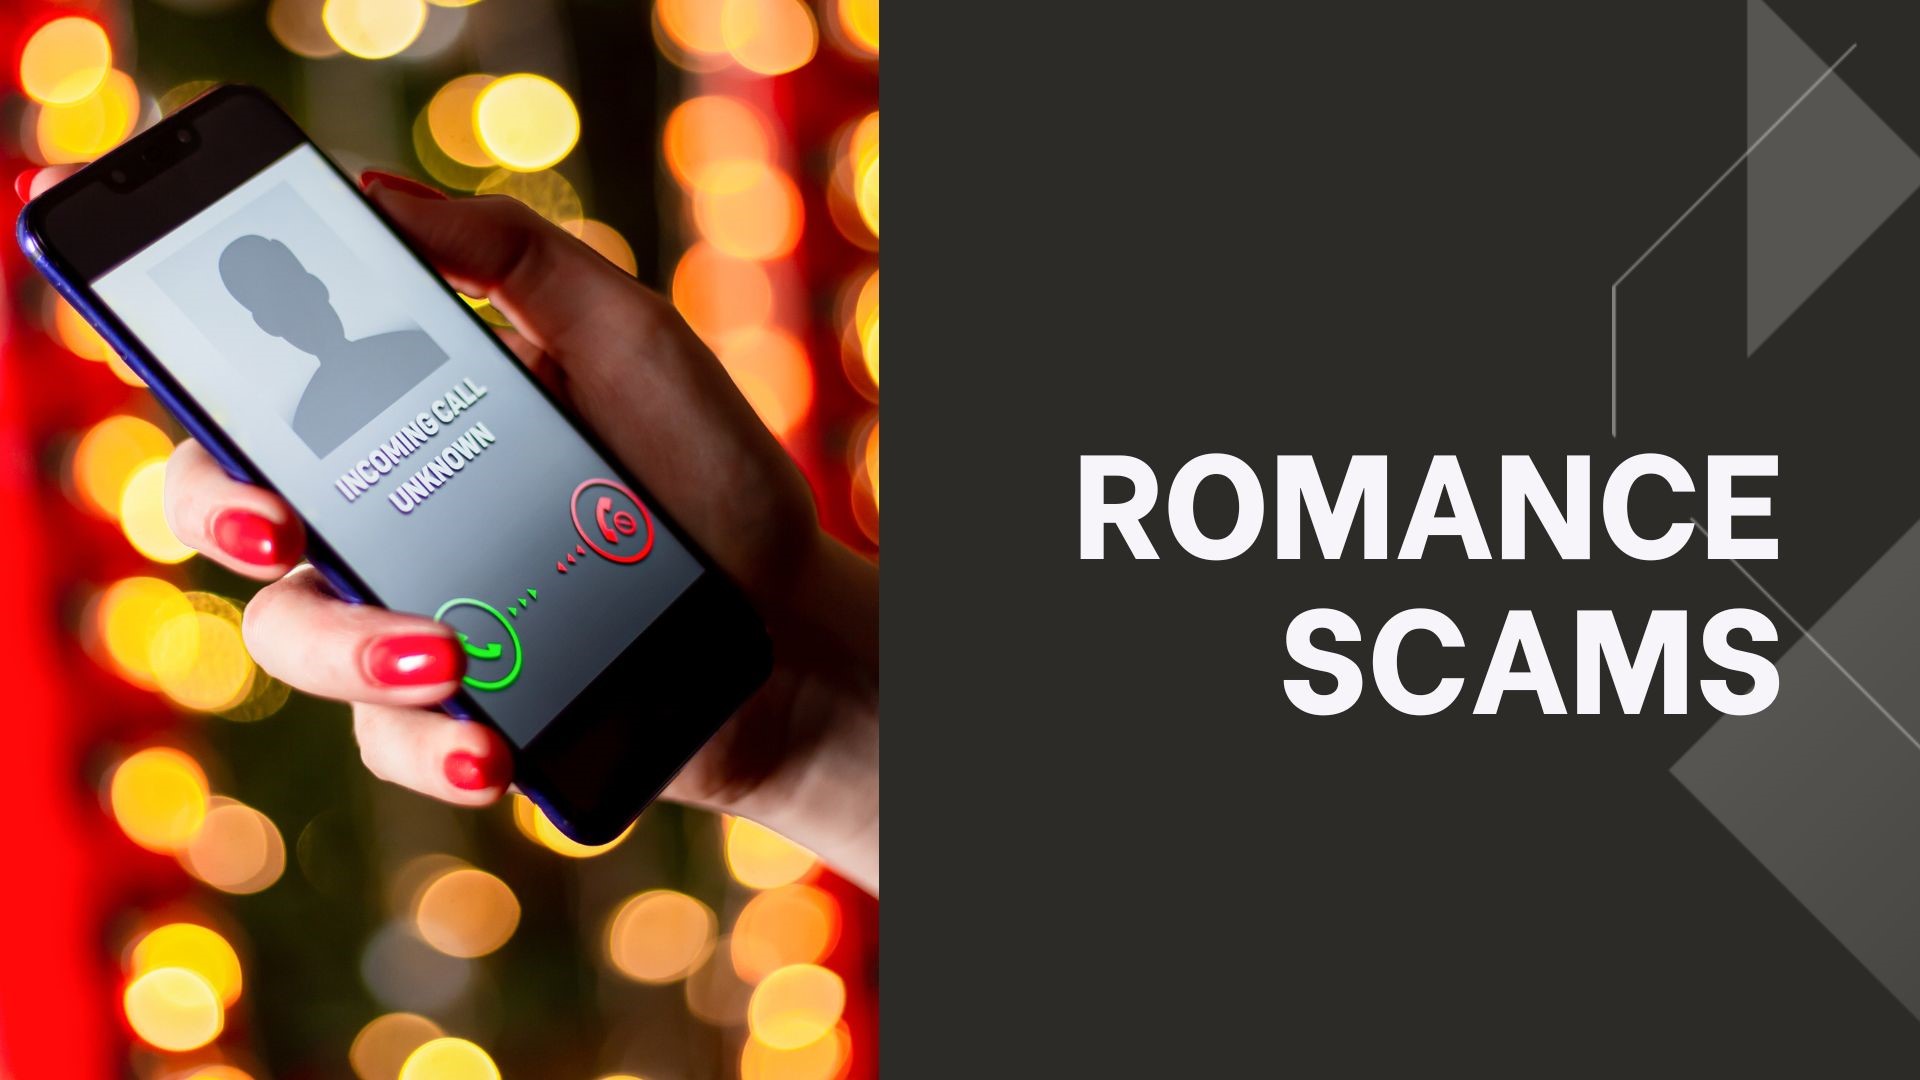 Dating or defrauding? Breaking down what you need to know about romance scams and how you can spot them and protect yourself.